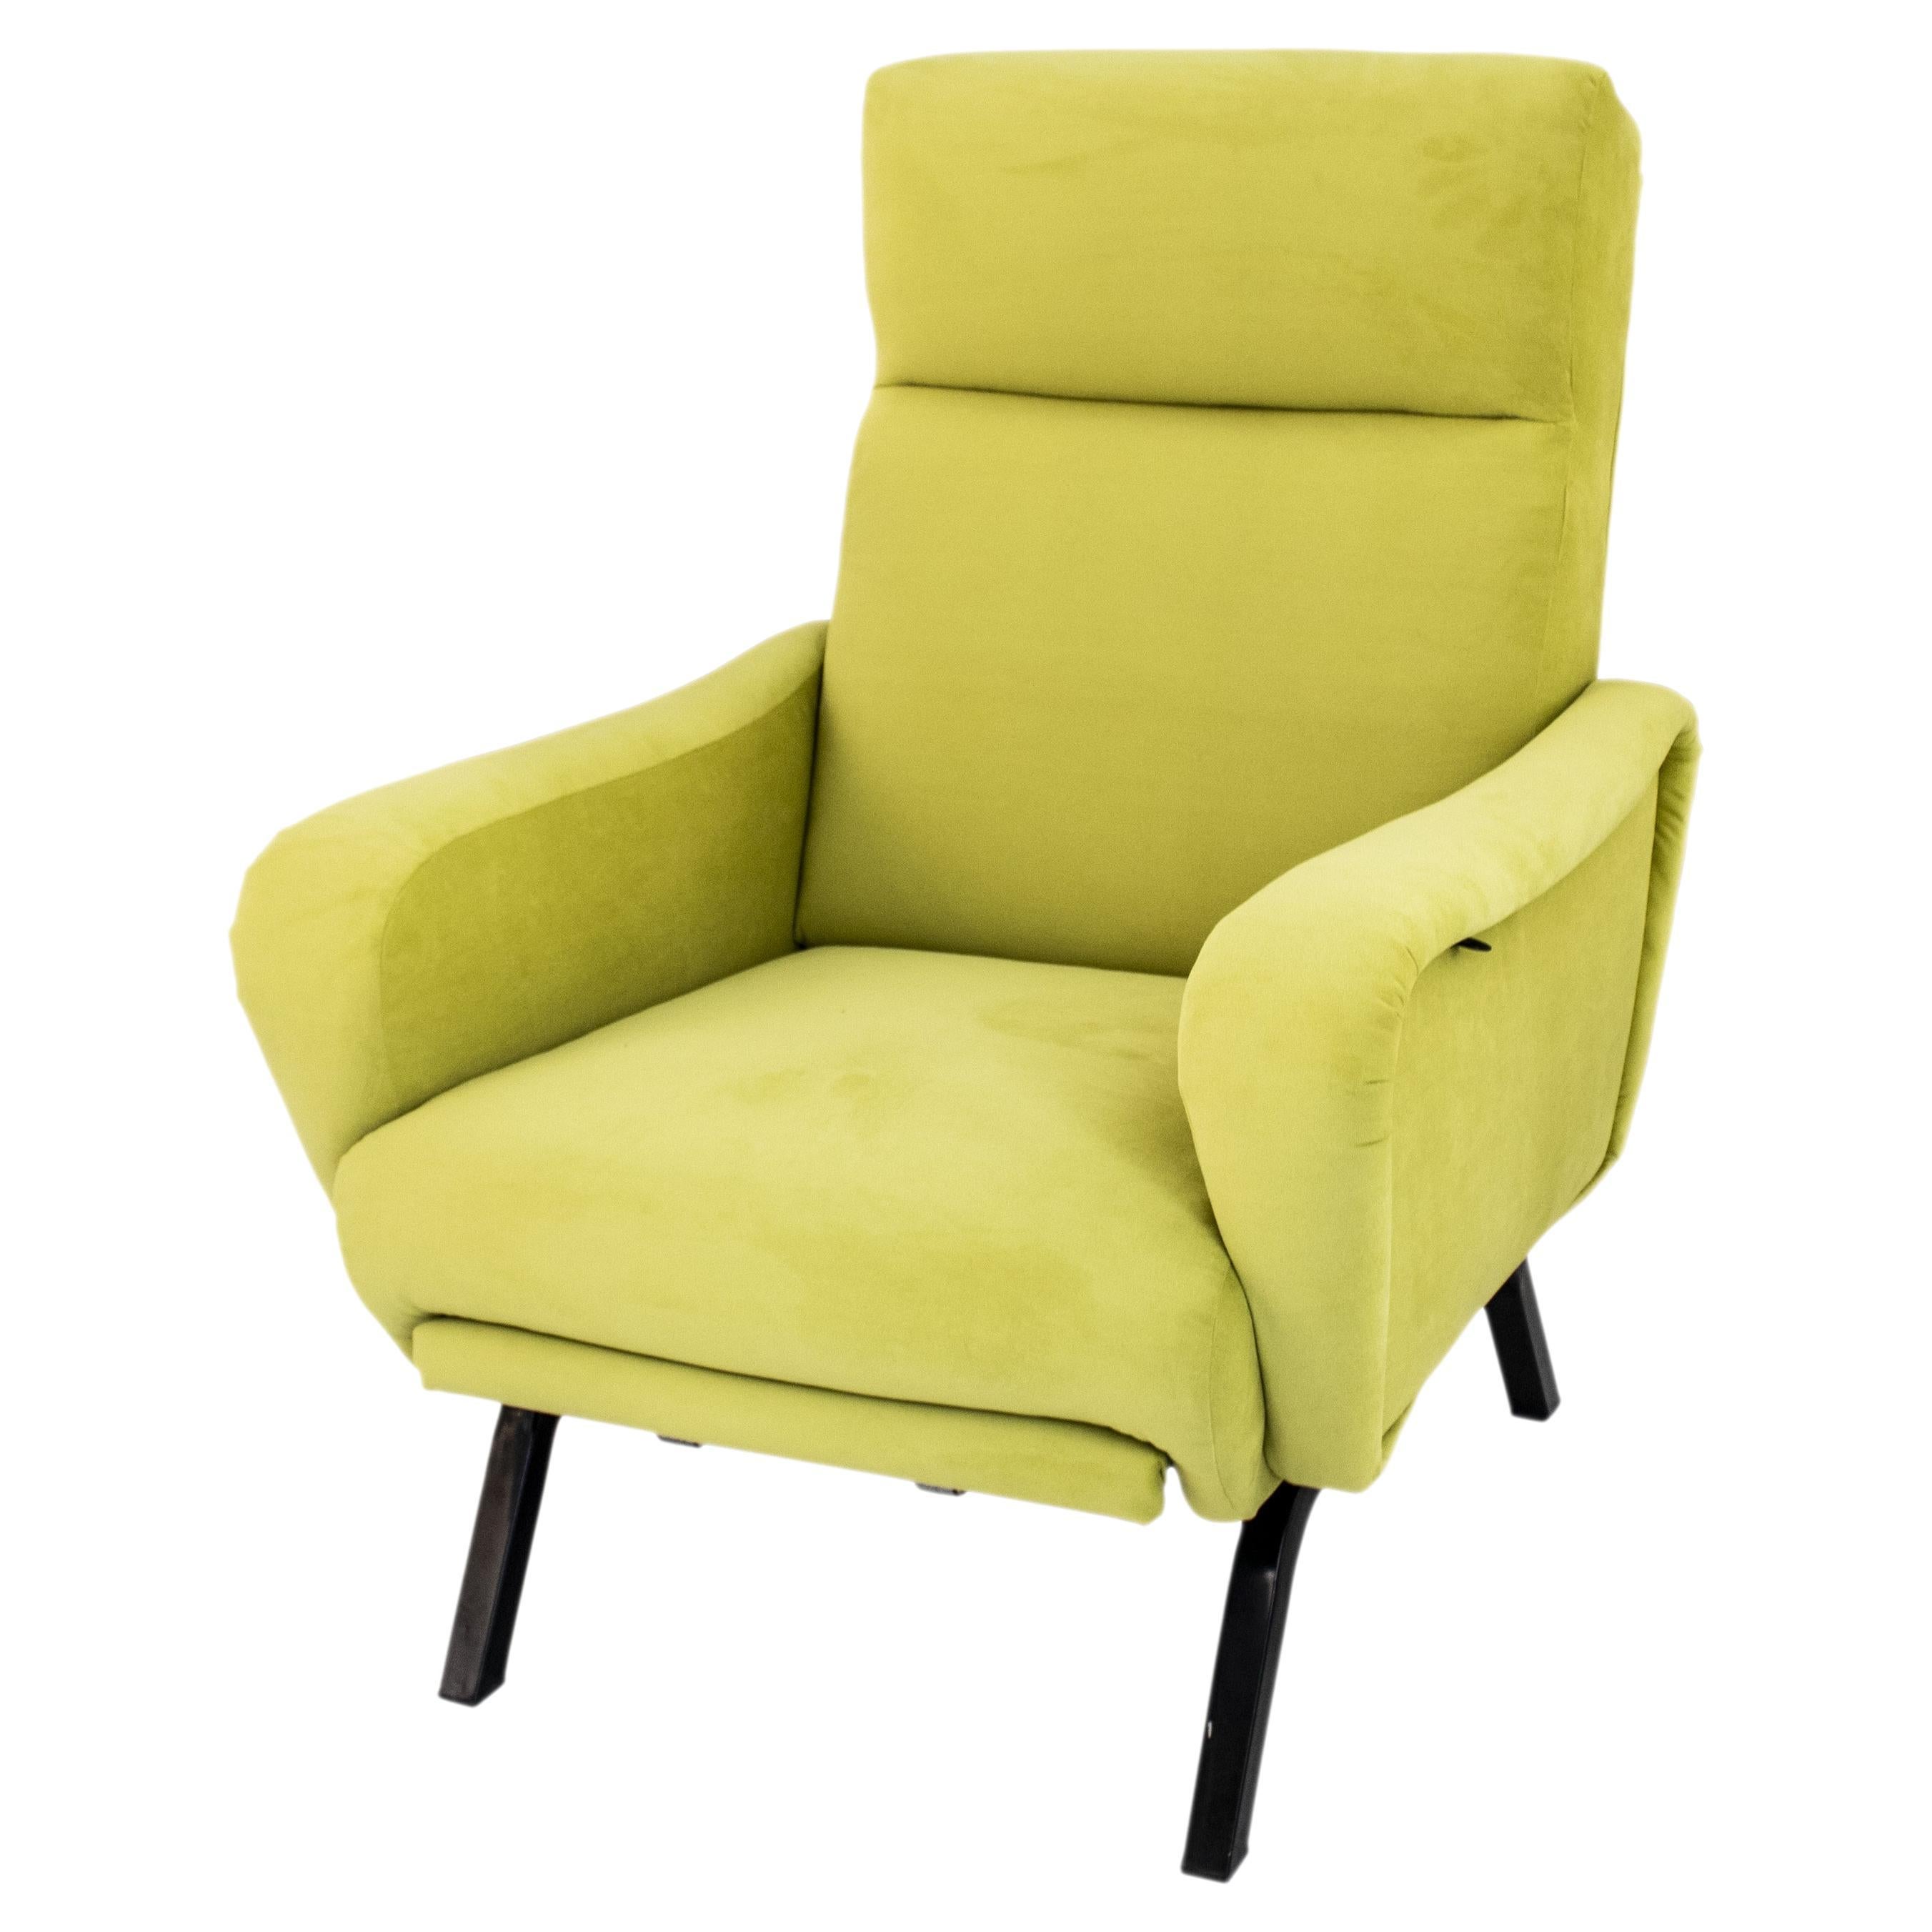 This italian reclinable armchair is made out of a solid metal and wood structure, covered in foam, and upholstered in a bright green velvet fabric. 
It's a comfortable and versatile design that allows the seat to recline and gives the user a more